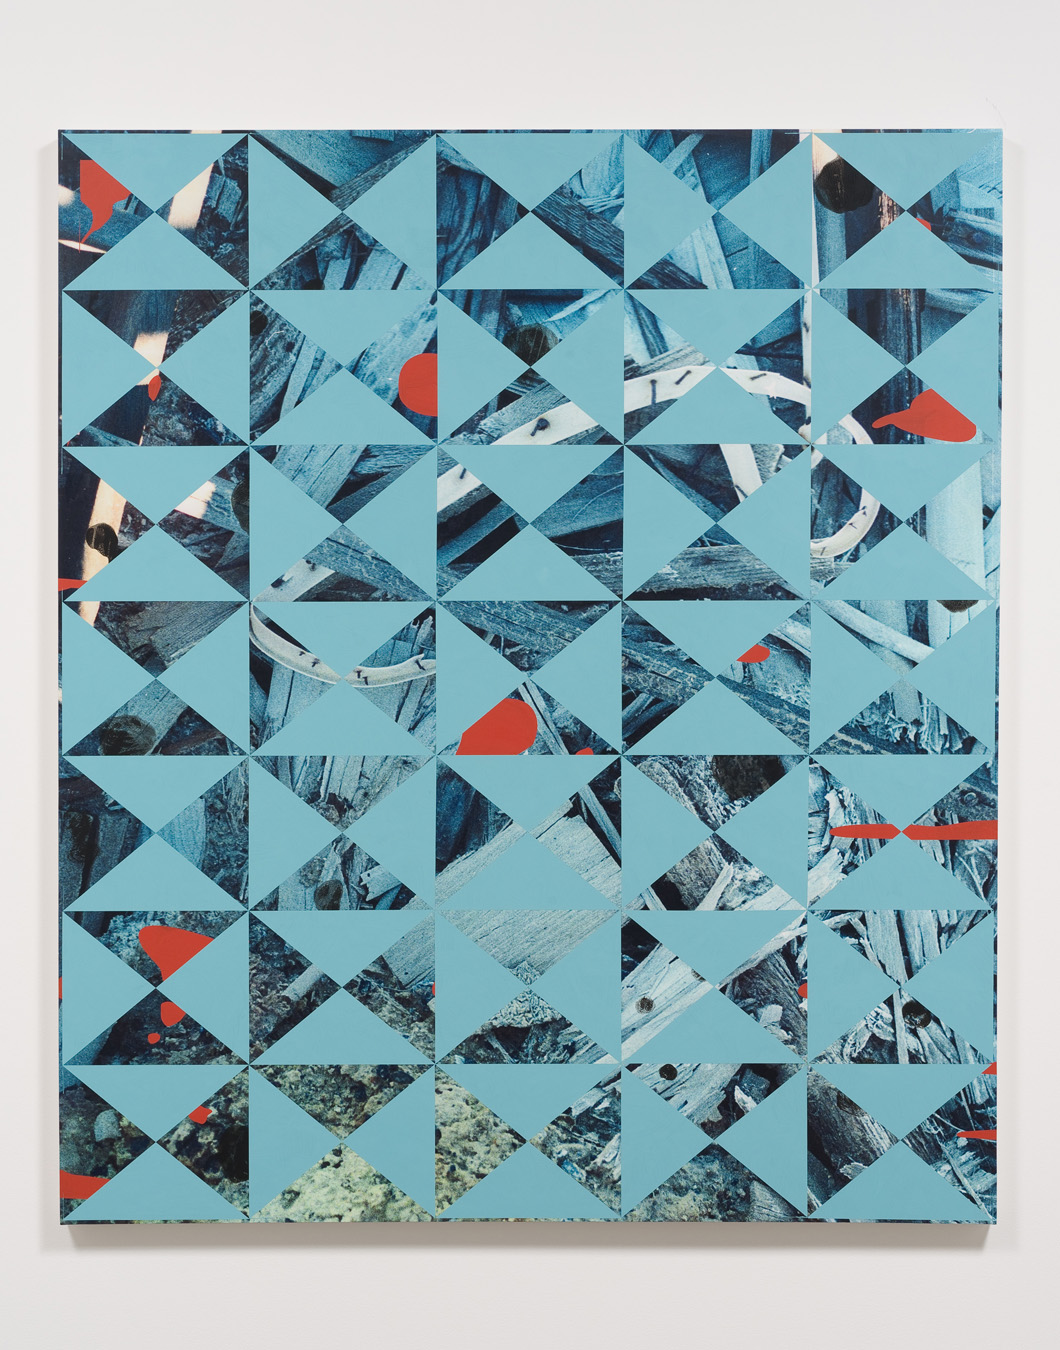  Salton Sea (heap), 2012  Acrylic, oil and UV cured ink on canvas over panel  77 x 66 inches  195.58 x 167.64 cm       